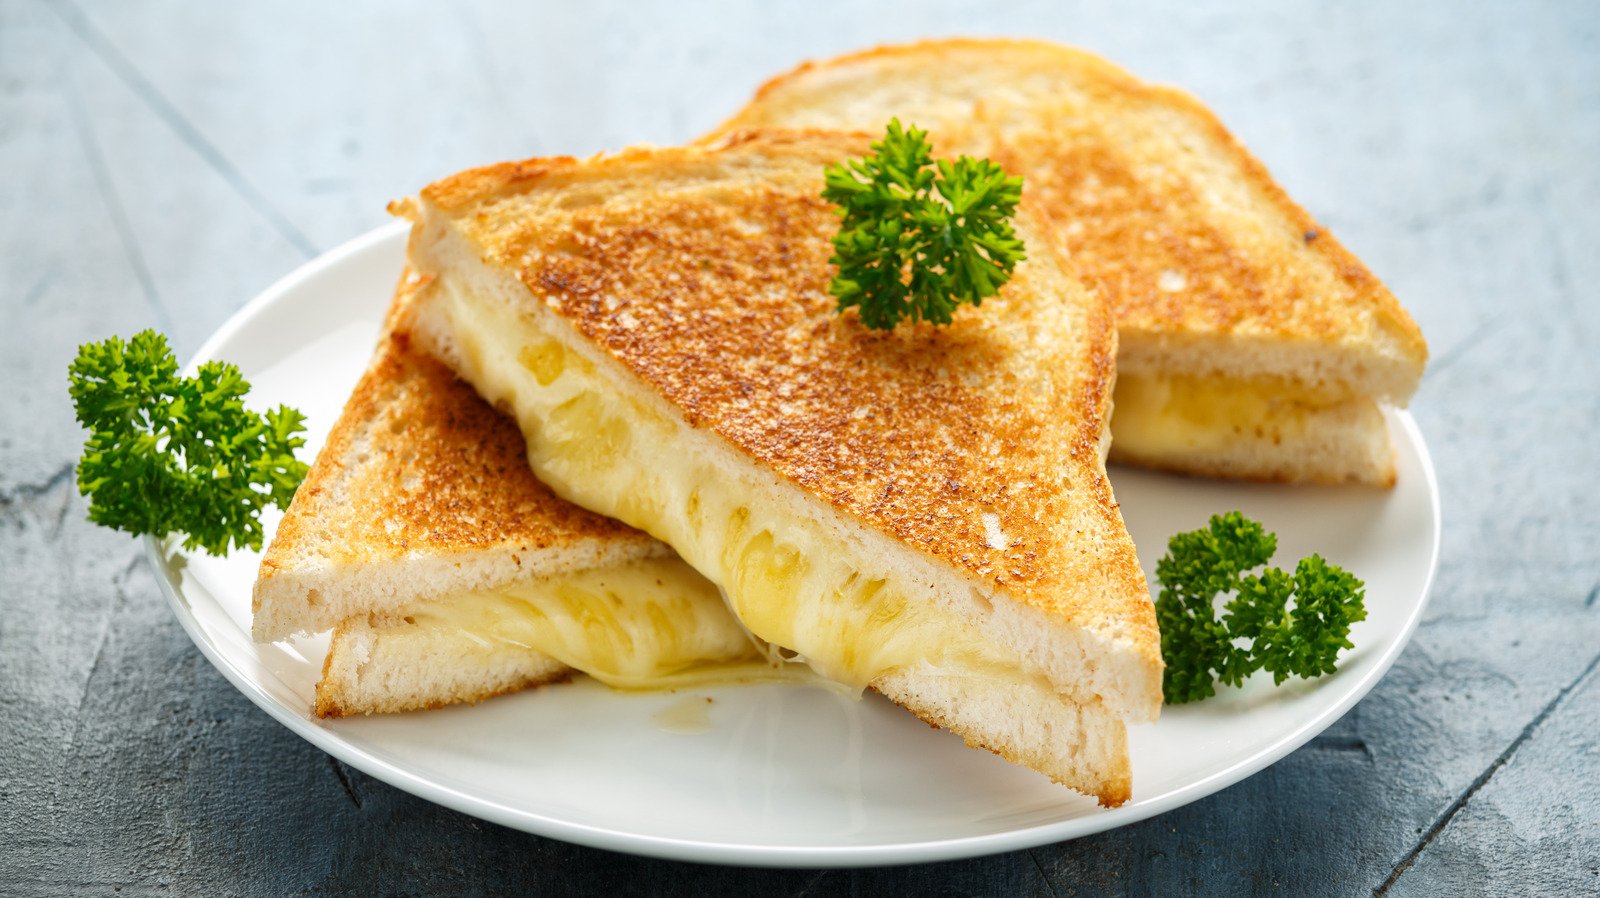 This Method Will Give You Perfectly Melted Grilled Cheese